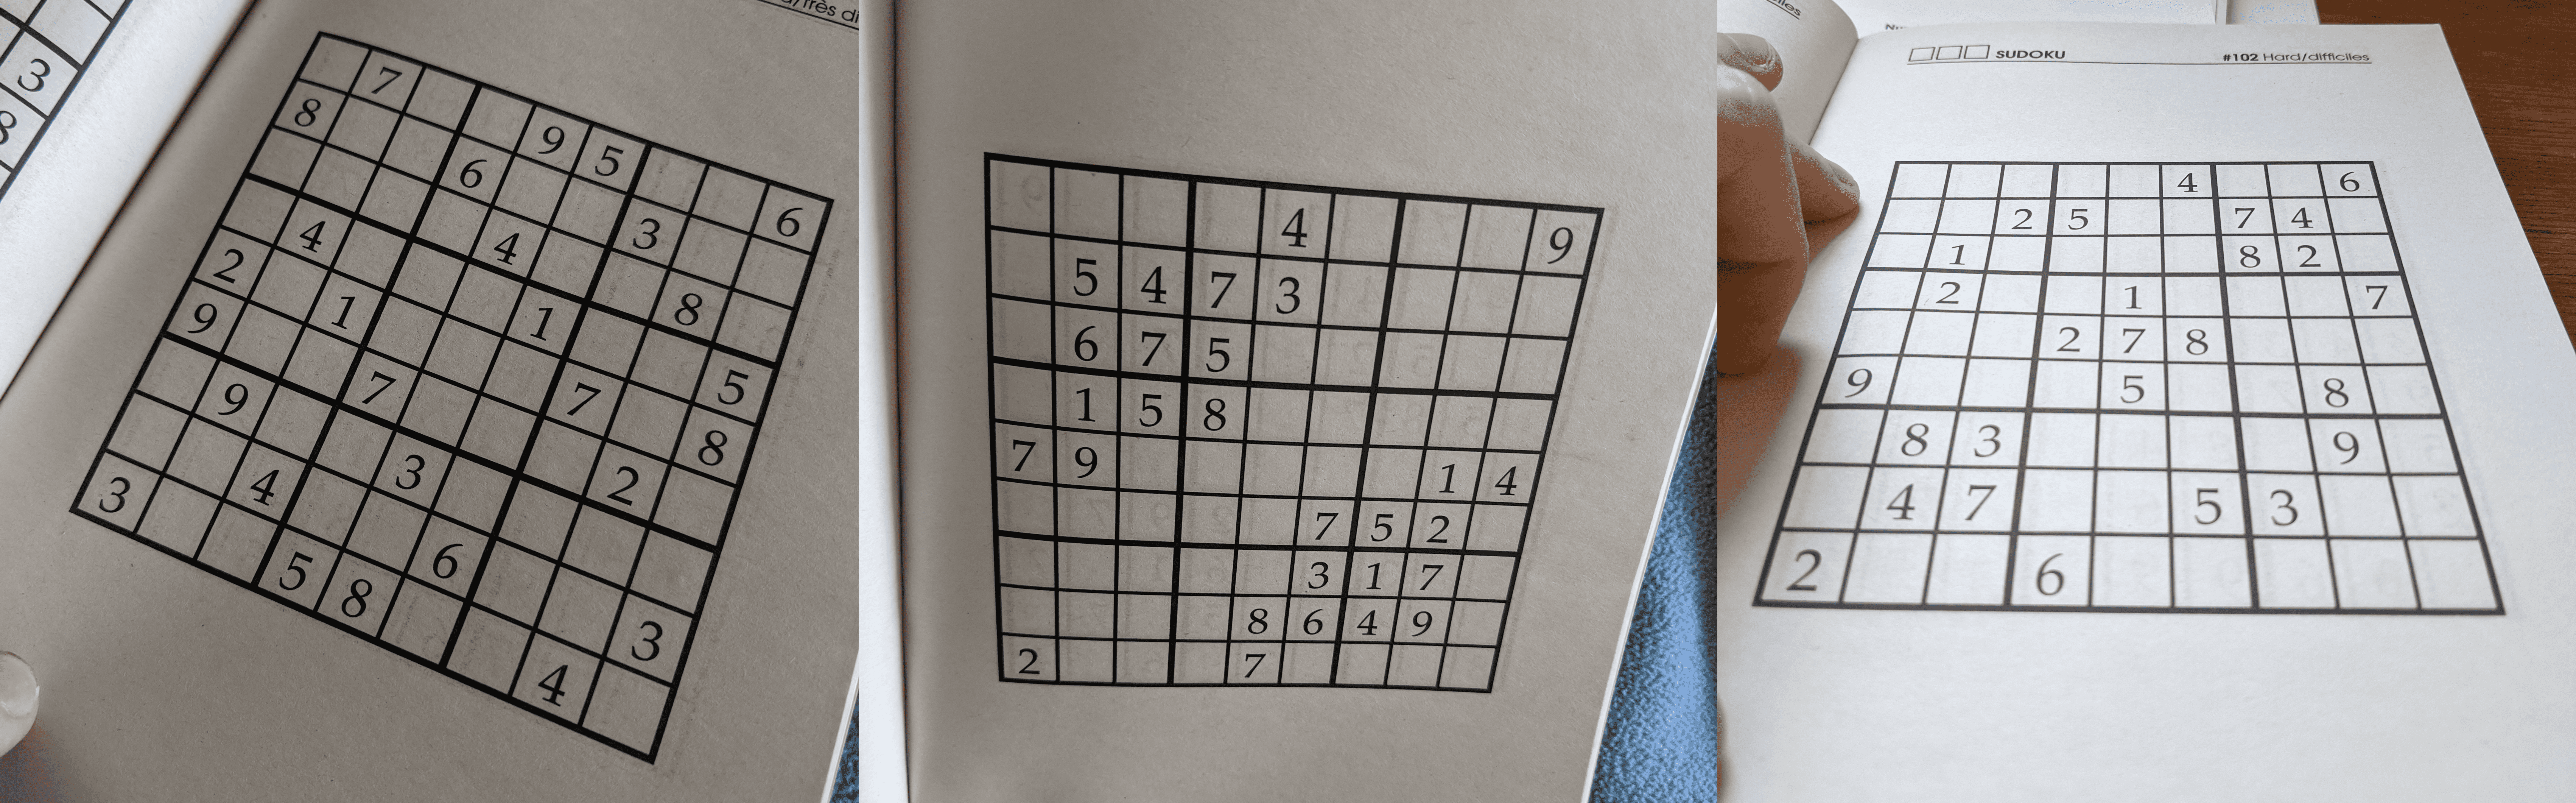 Example of sudoku grids from various perspective.